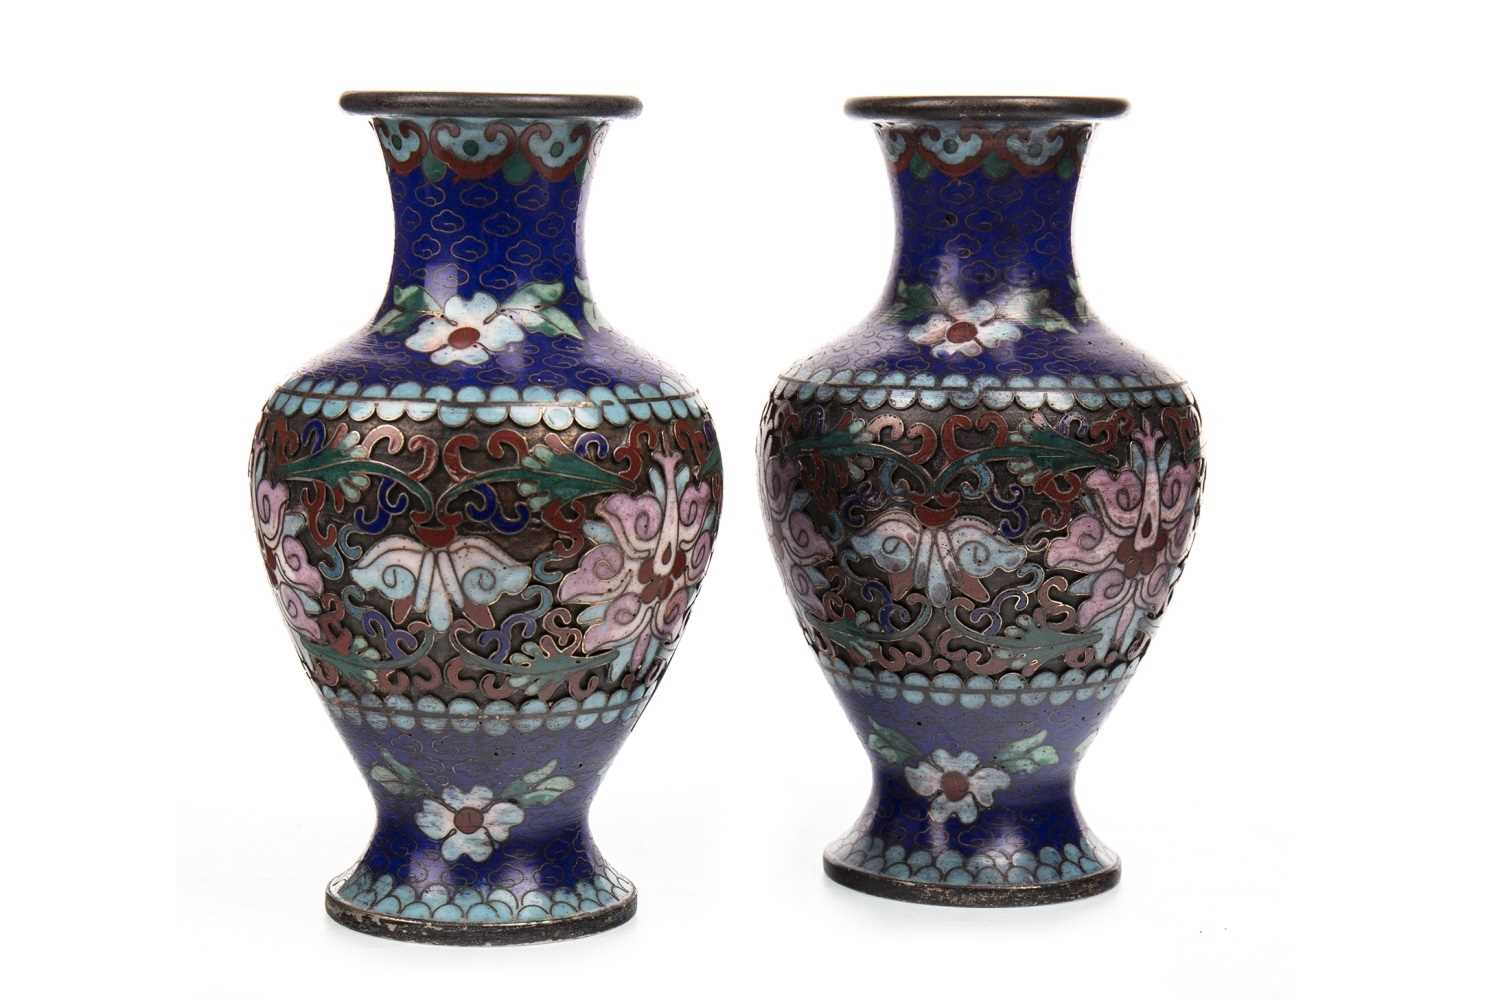 Lot 1087 - A PAIR OF CHINESE CLOISONNE VASES